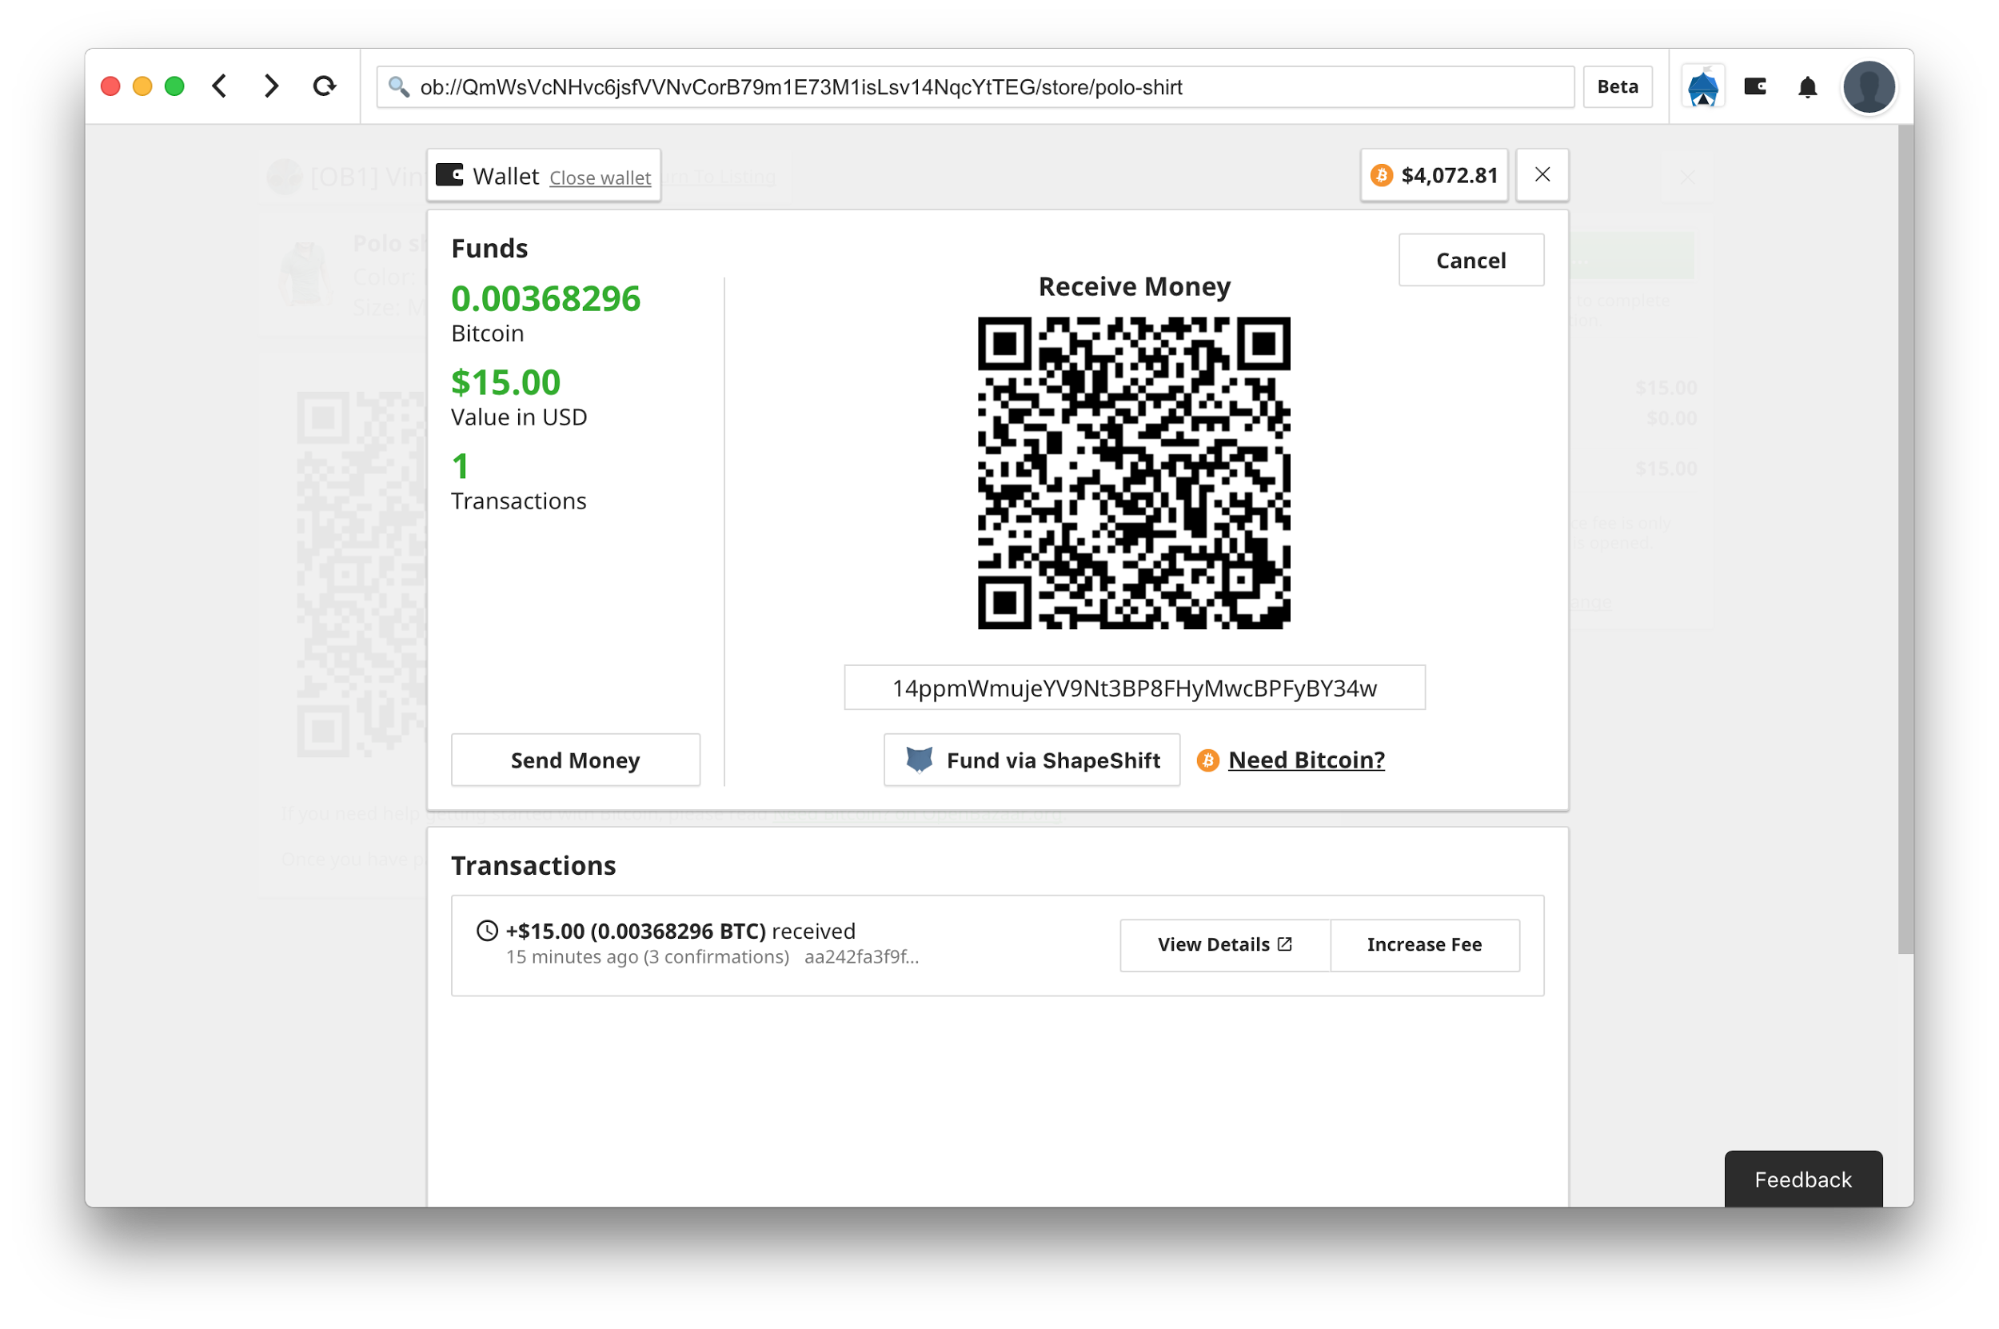 A screenshot showing the ability to fund an OpenBazaar wallet with Zcash